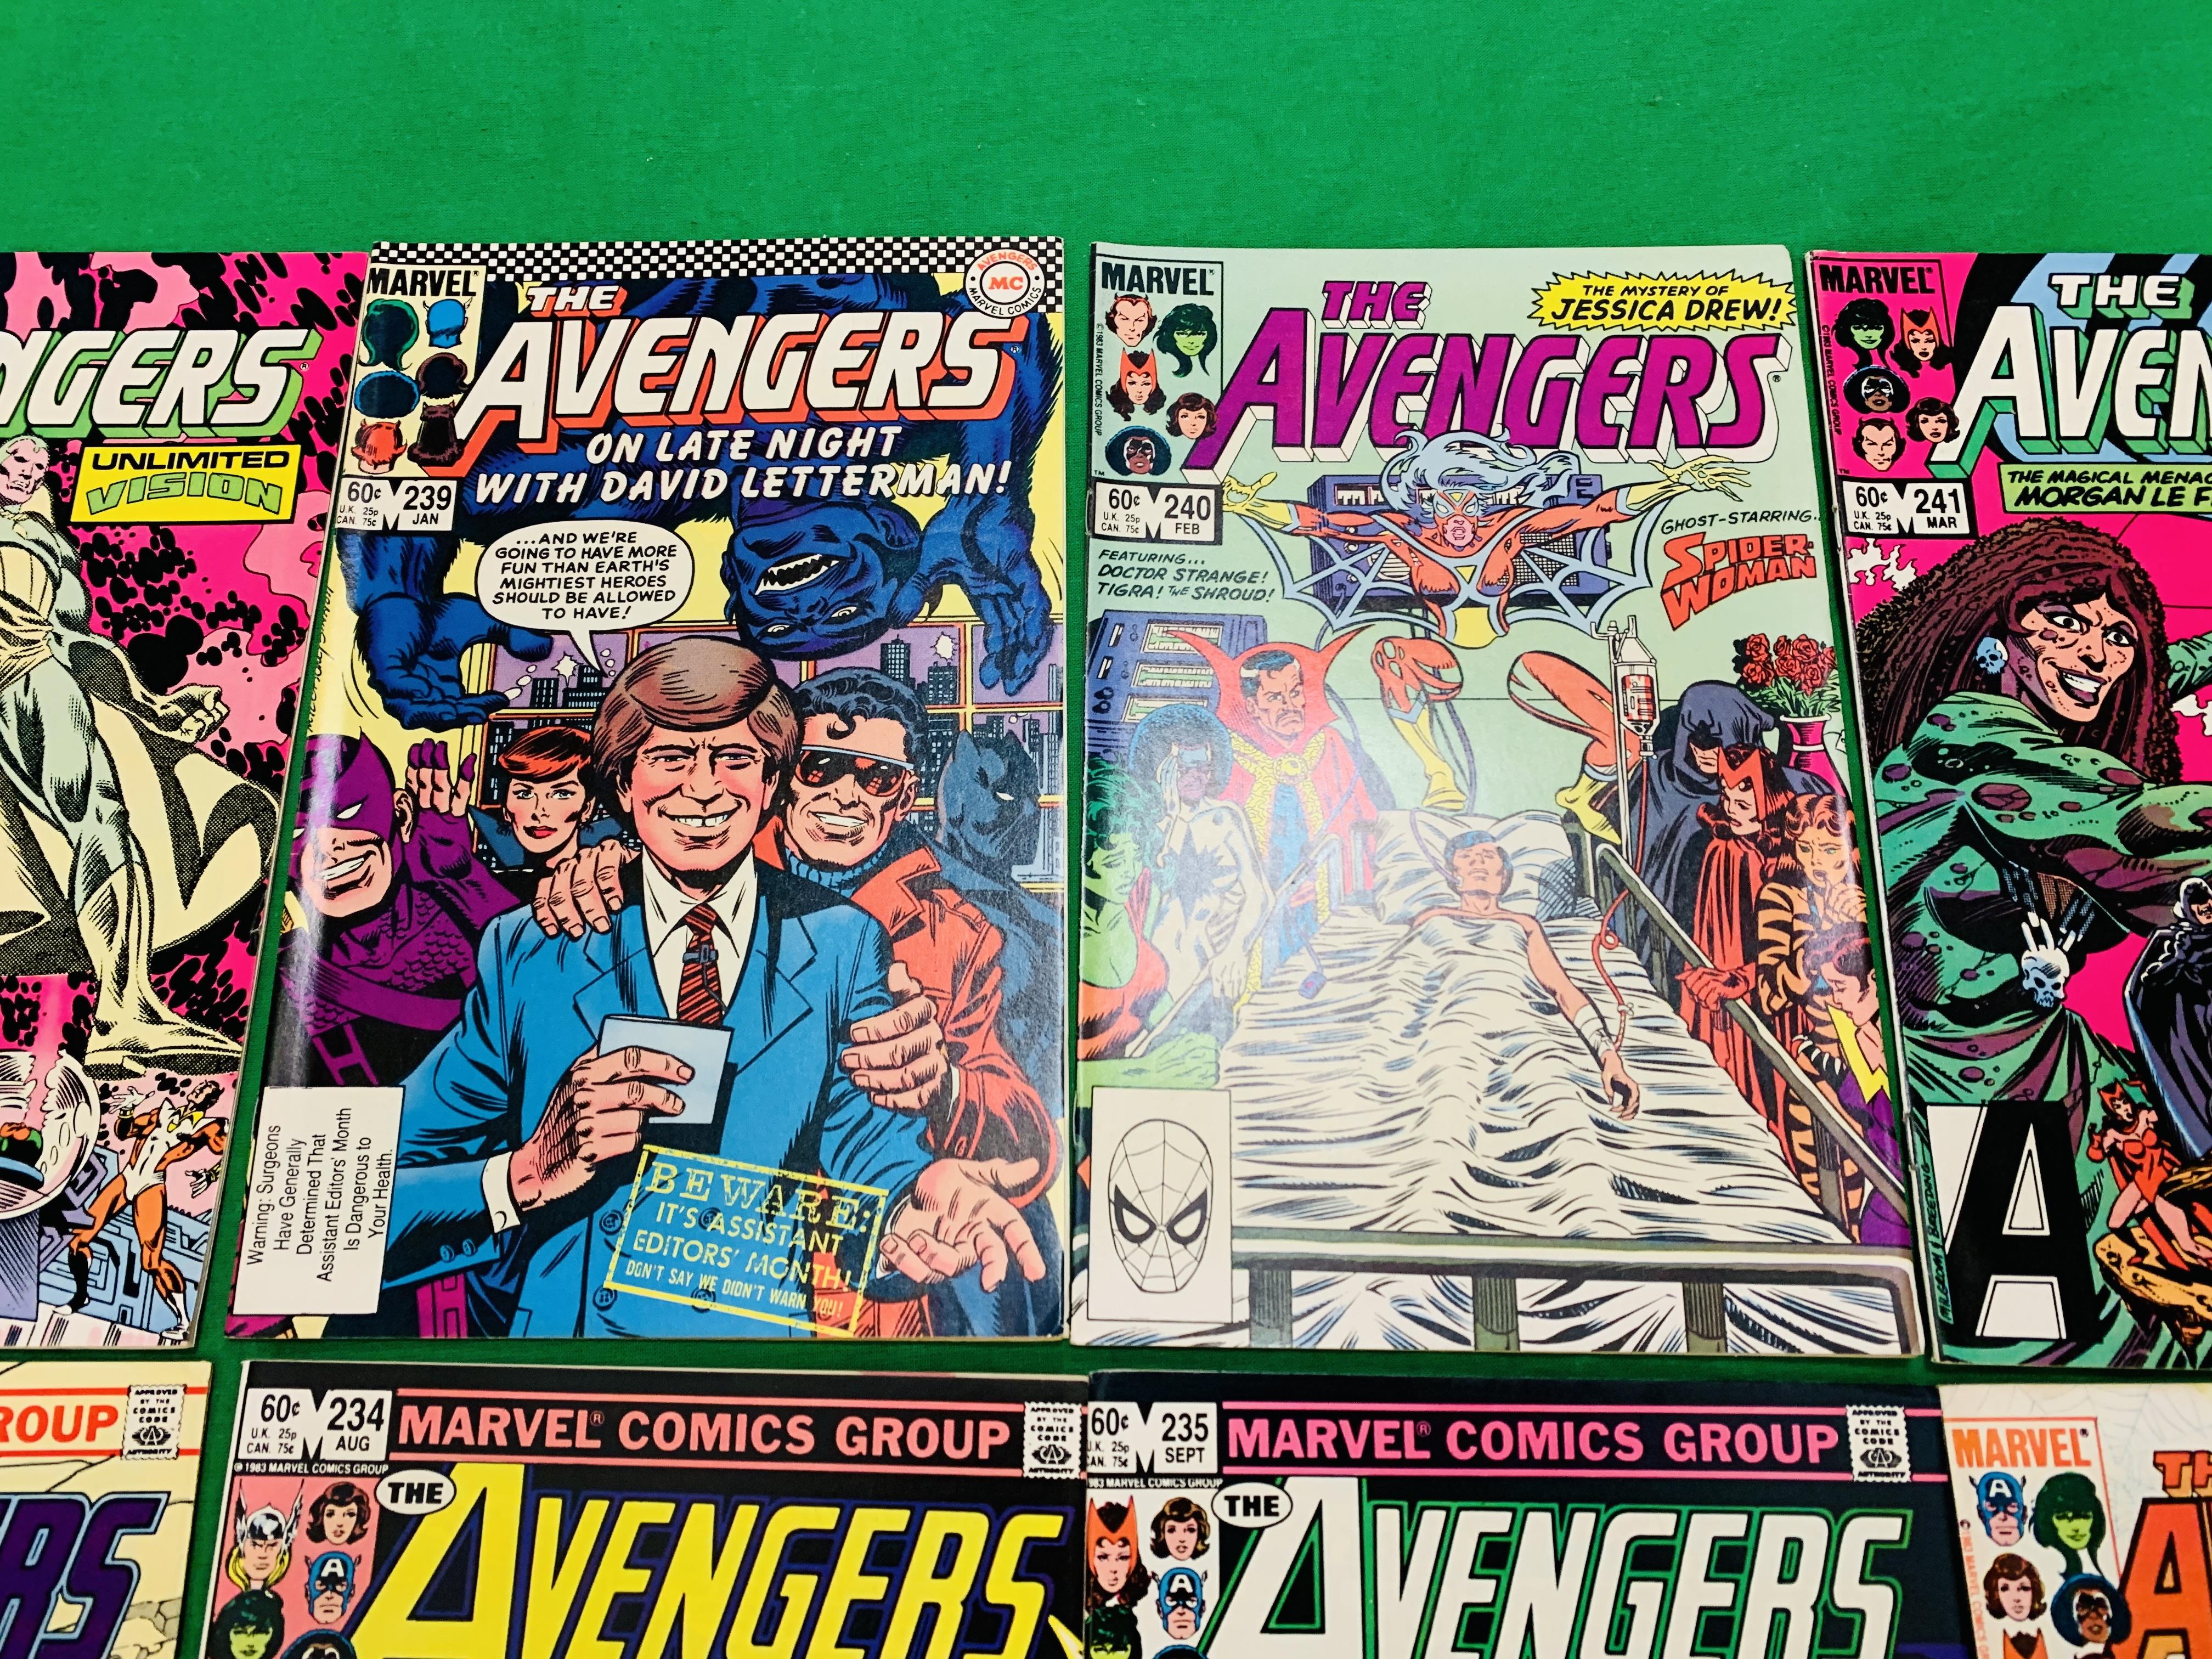 MARVEL COMICS THE AVENGERS NO. 101 - 299, MISSING ISSUES 103 AND 110. - Image 97 of 130